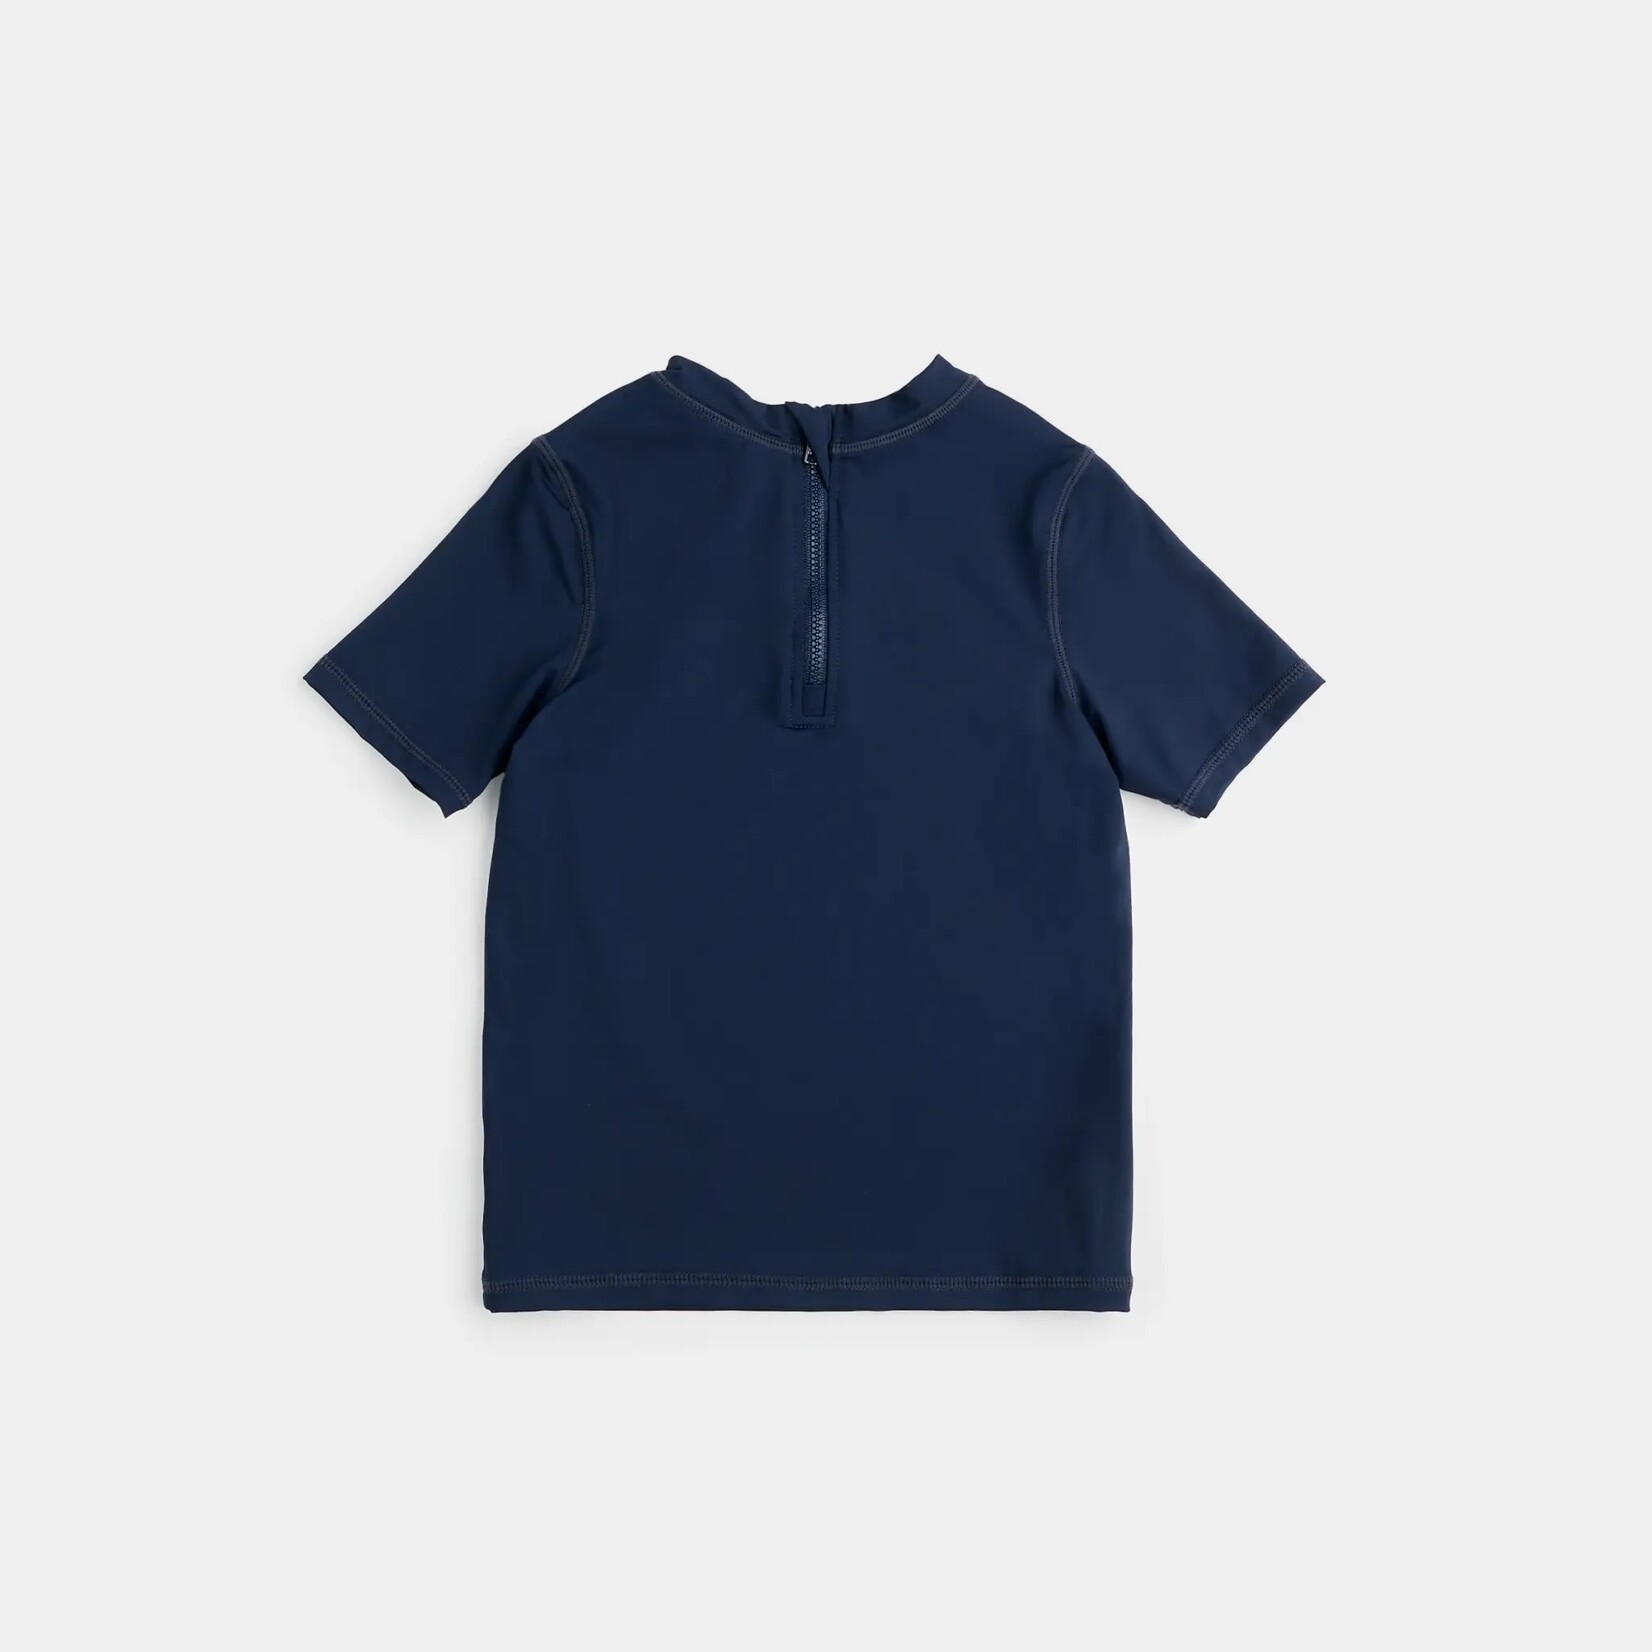 Miles the label MILES THE LABEL - Navy blue short-sleeved Rashguard top 'Sun's out surf's up'